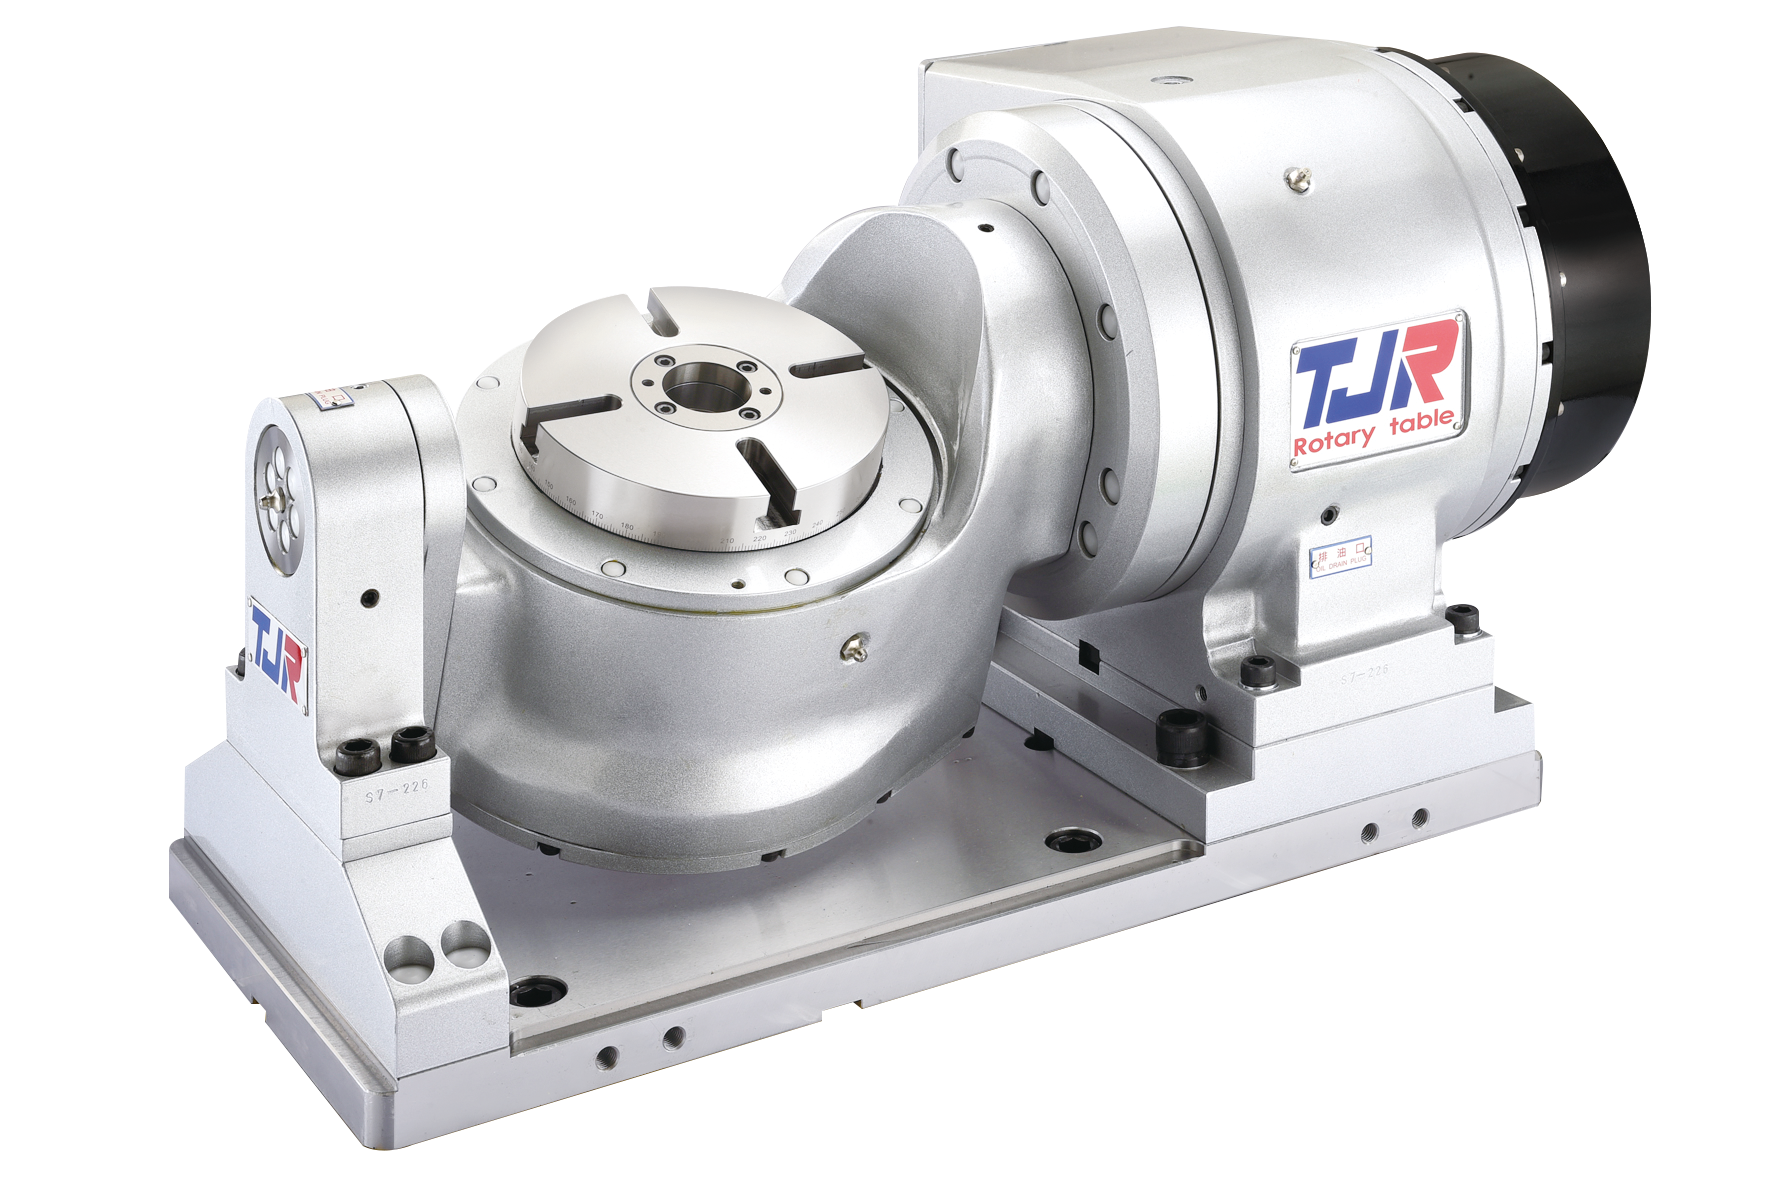 The 4th & 5th Axis Direct Drive Motor Series - The 4th Axis Direct Drive Motor Series (Pneumatic Brake)